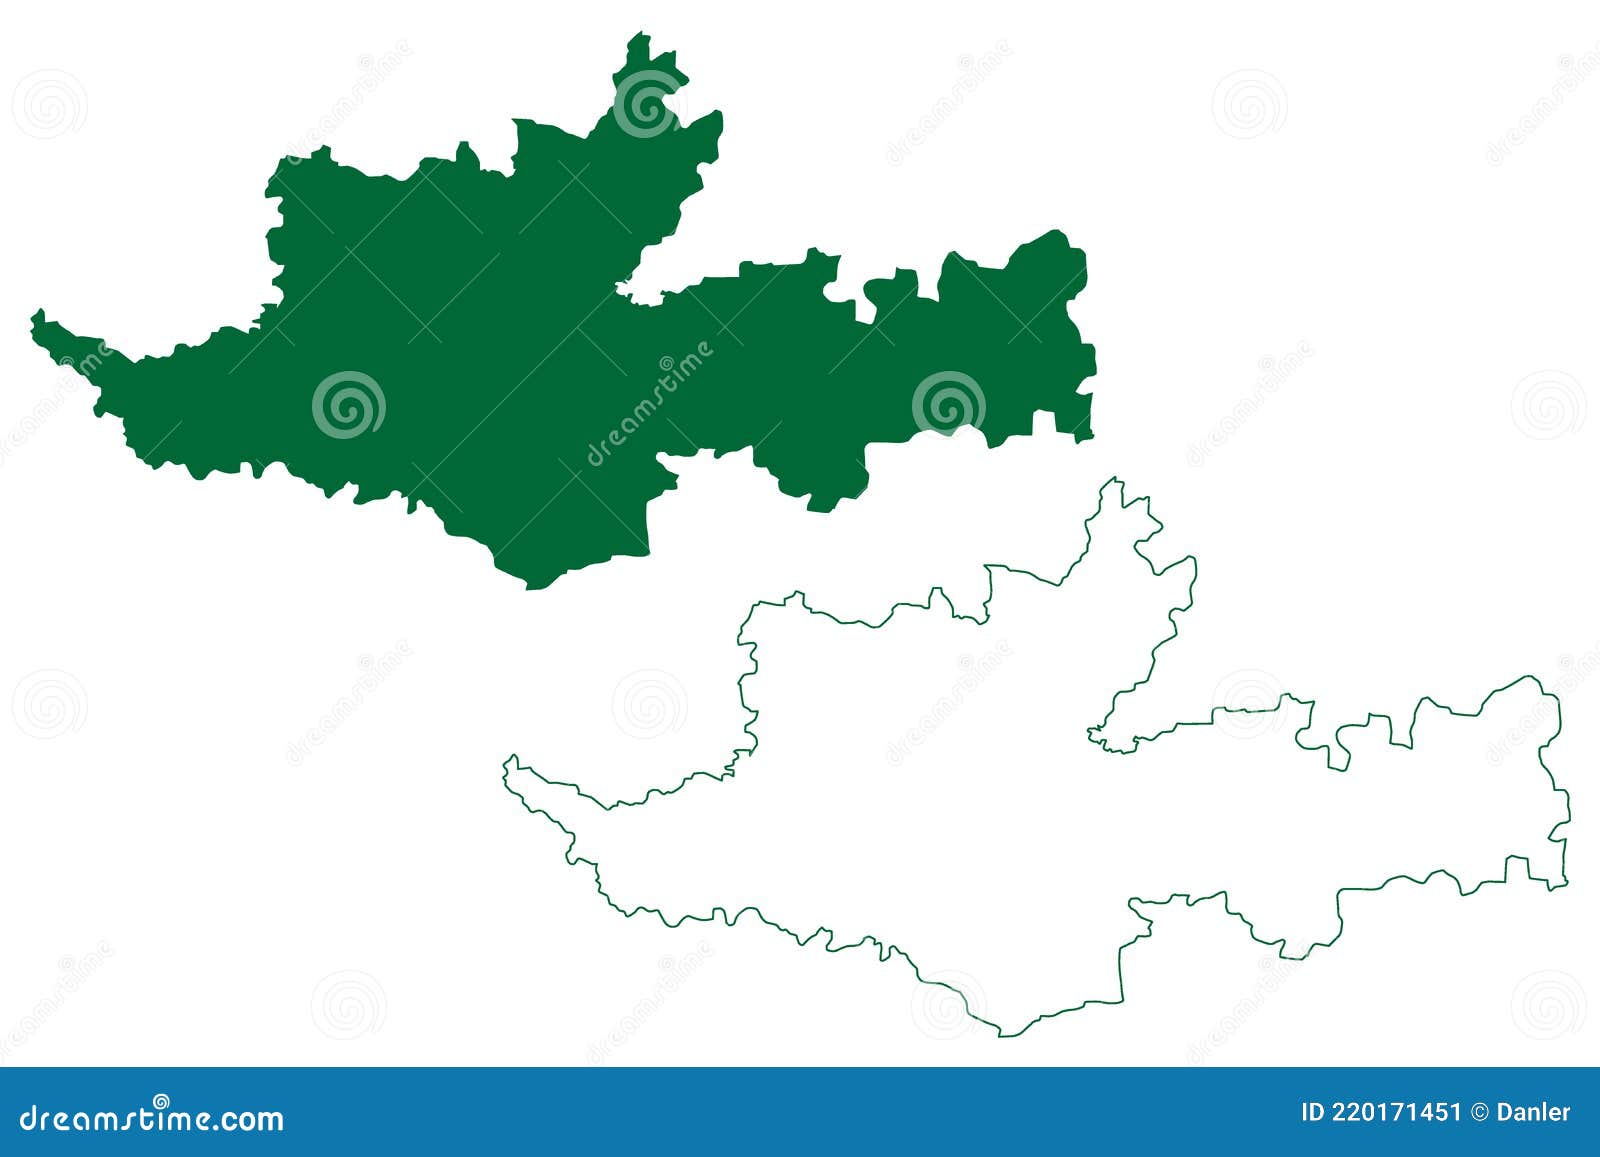 Maharashtra Map Vector Images (over 620)